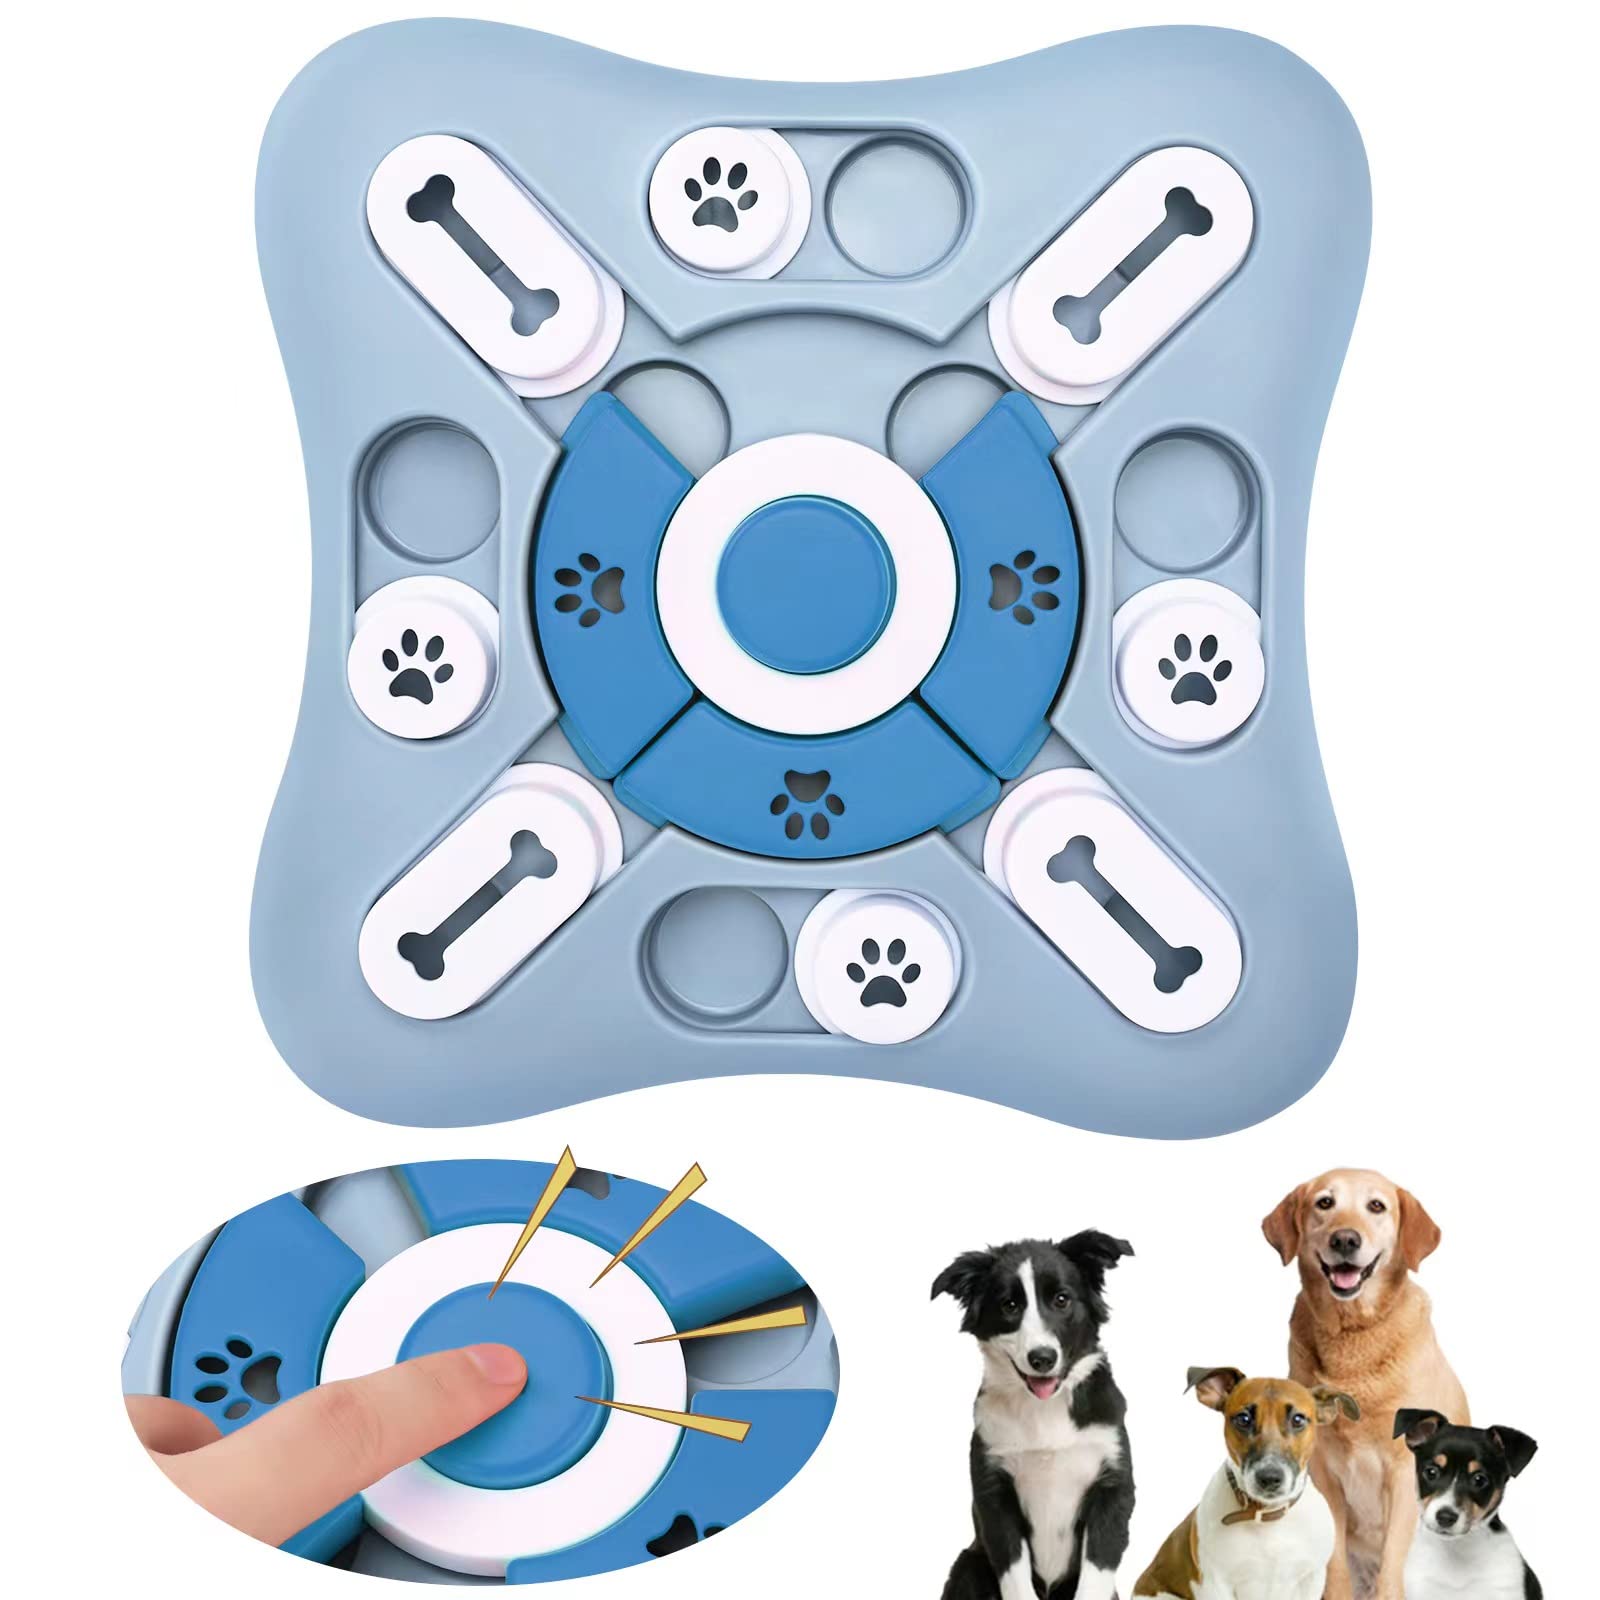 2022 New Edition Dog Puzzle Toys, Interactive Dog Toy for IQ